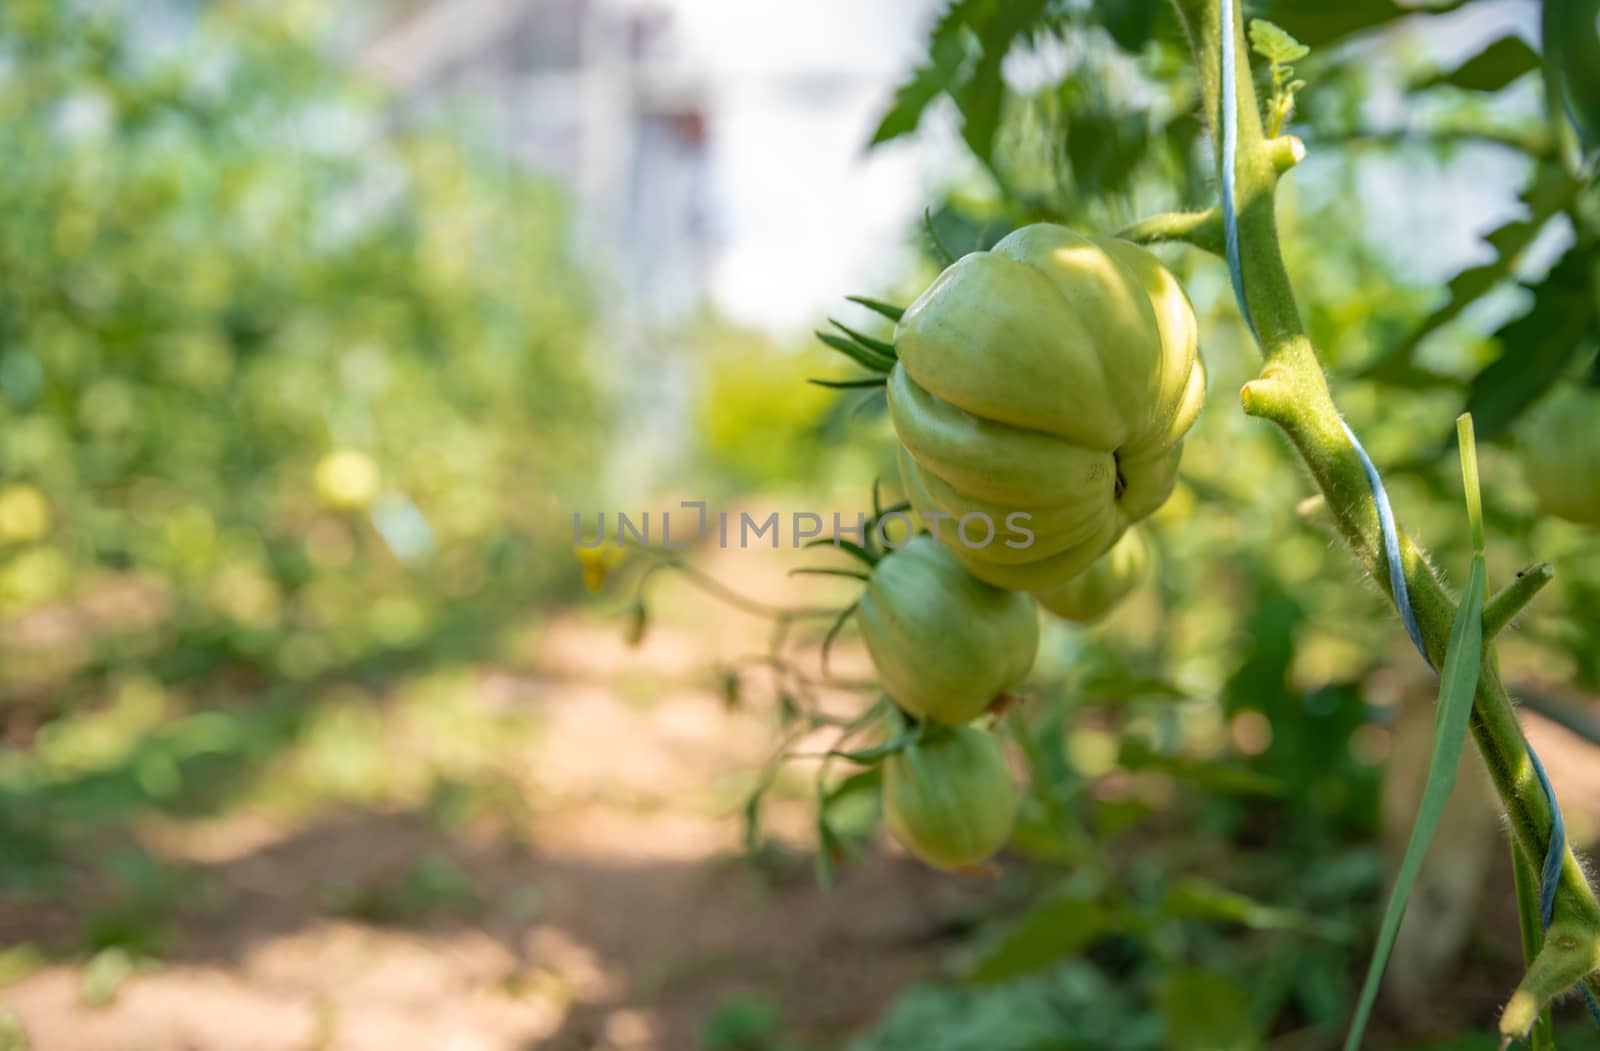 Organic green tomatoes ripen in a greenhouse. growing vegetables without chemicals, healthy food by Edophoto